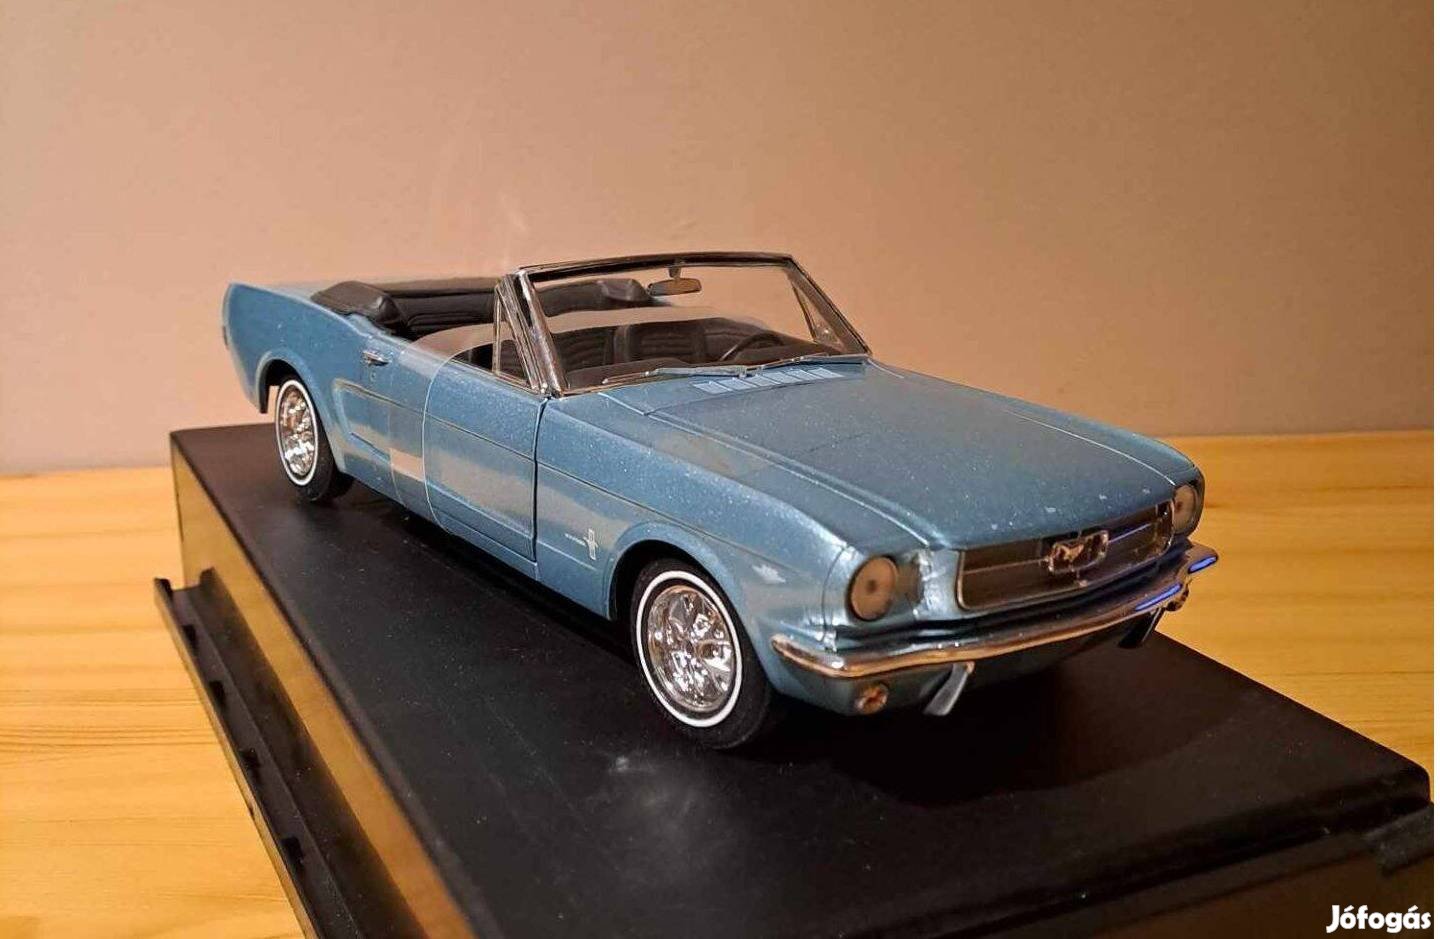 1:18 Revell Ford Mustang cabrio modell